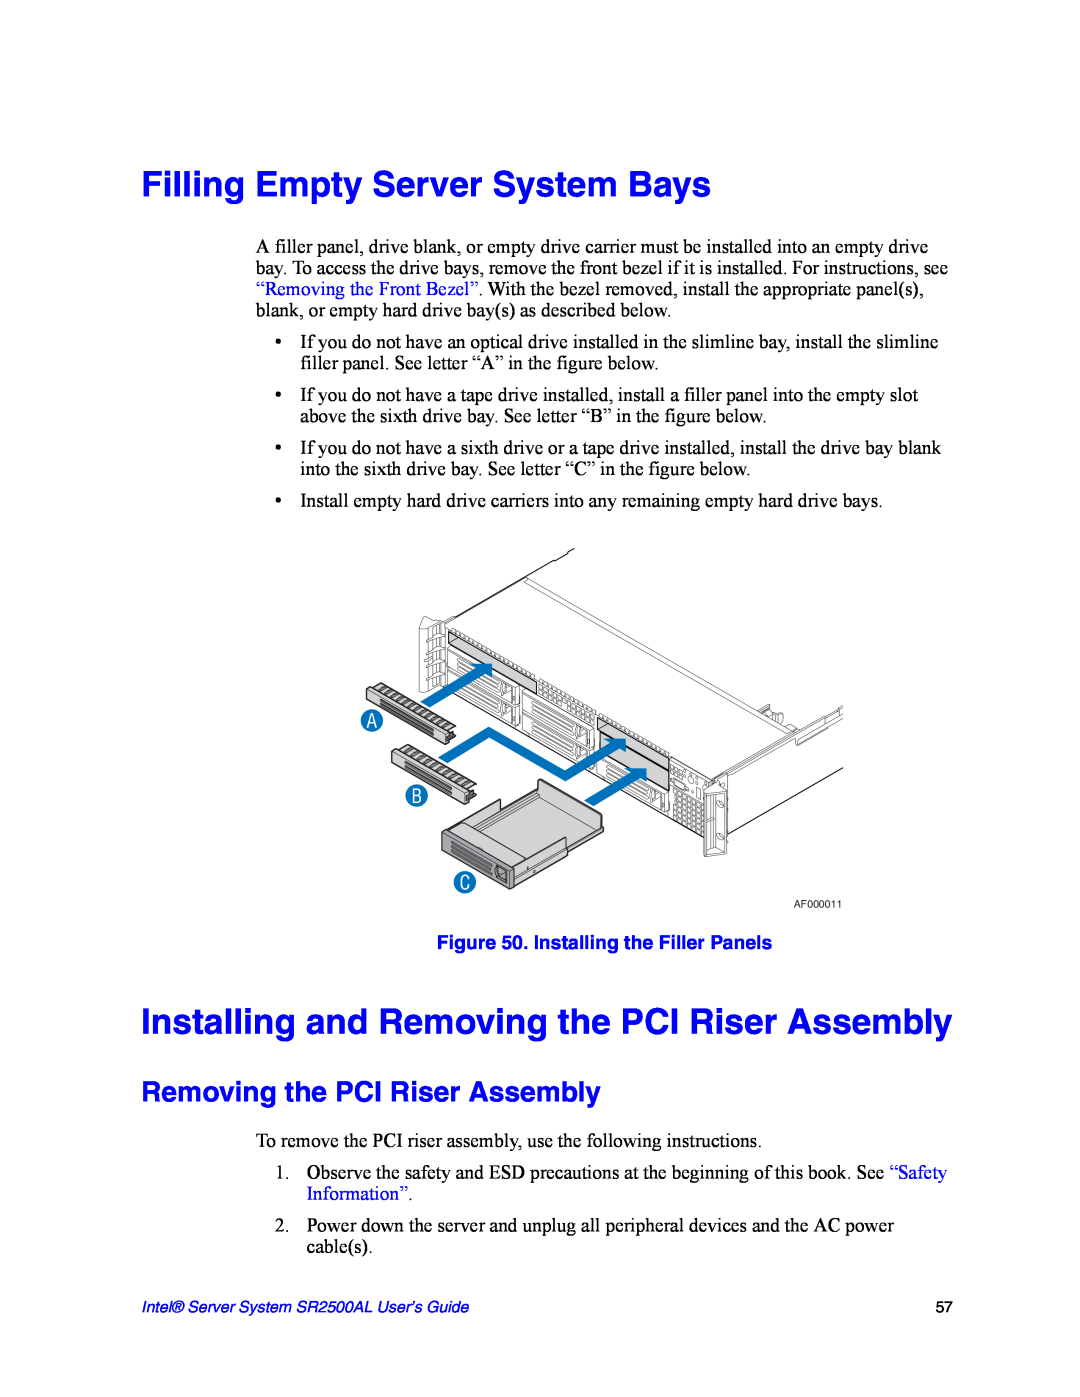 Intel SR2500AL manual Filling Empty Server System Bays, Installing and Removing the PCI Riser Assembly, A B C 